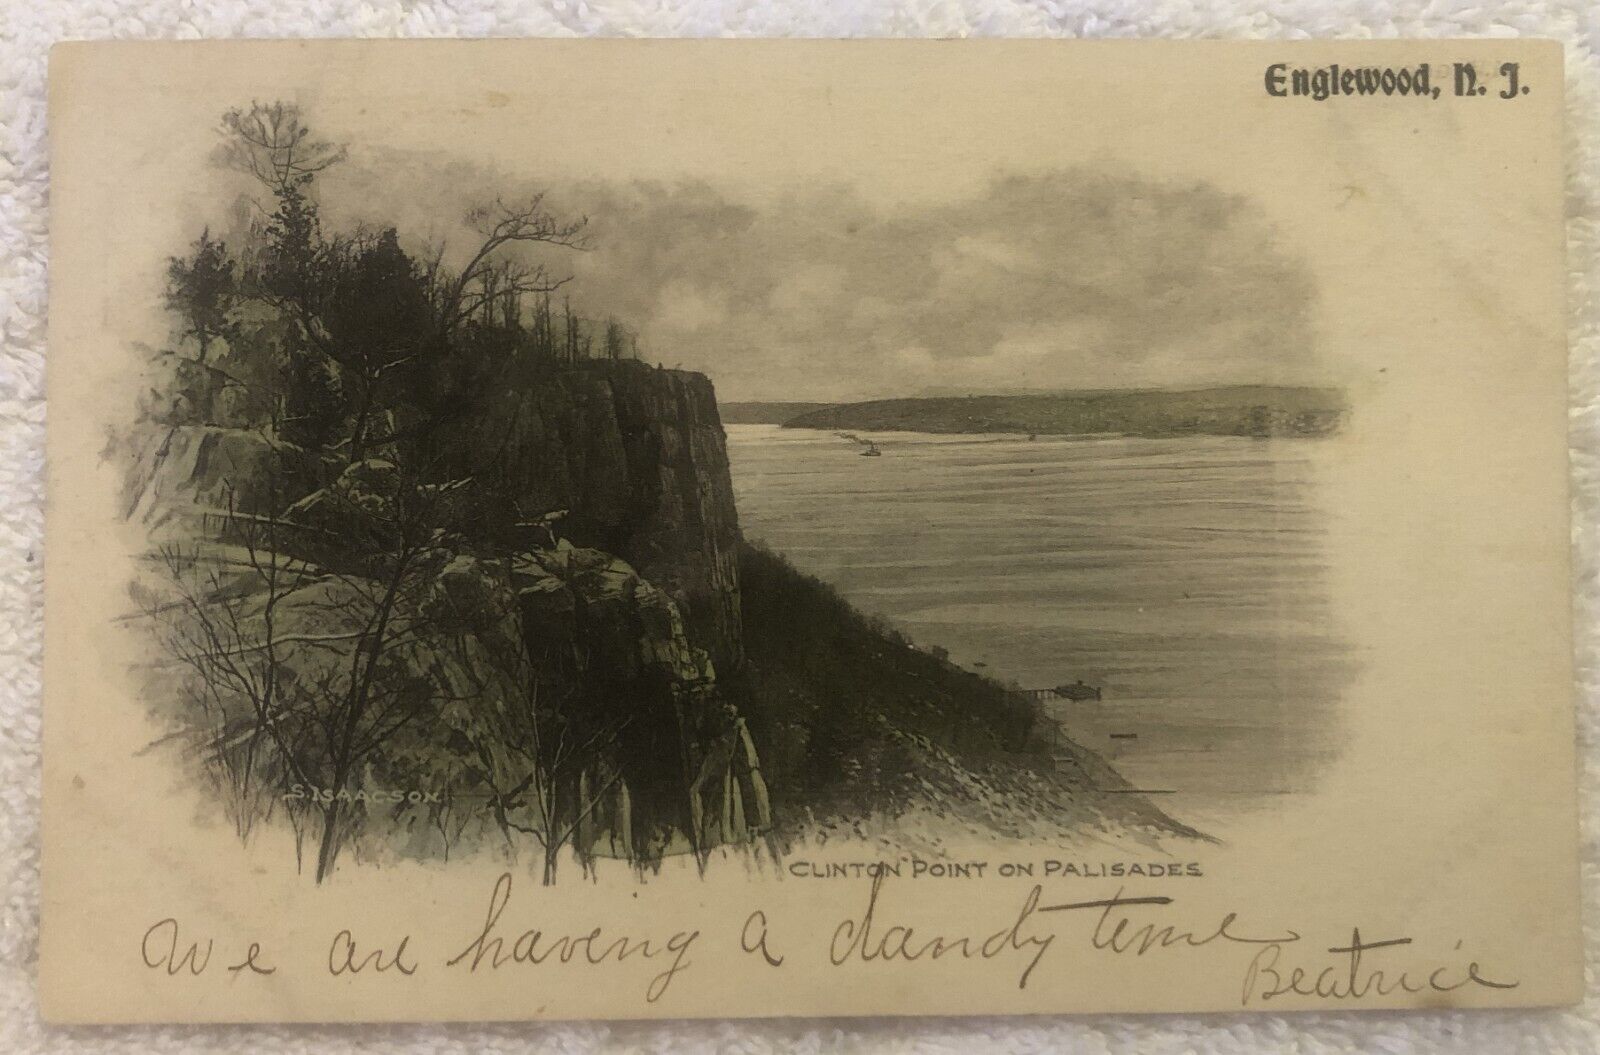 1906 Scenic Clinton Point Palisades Englewood New Jersey Posted Vintage Postcard